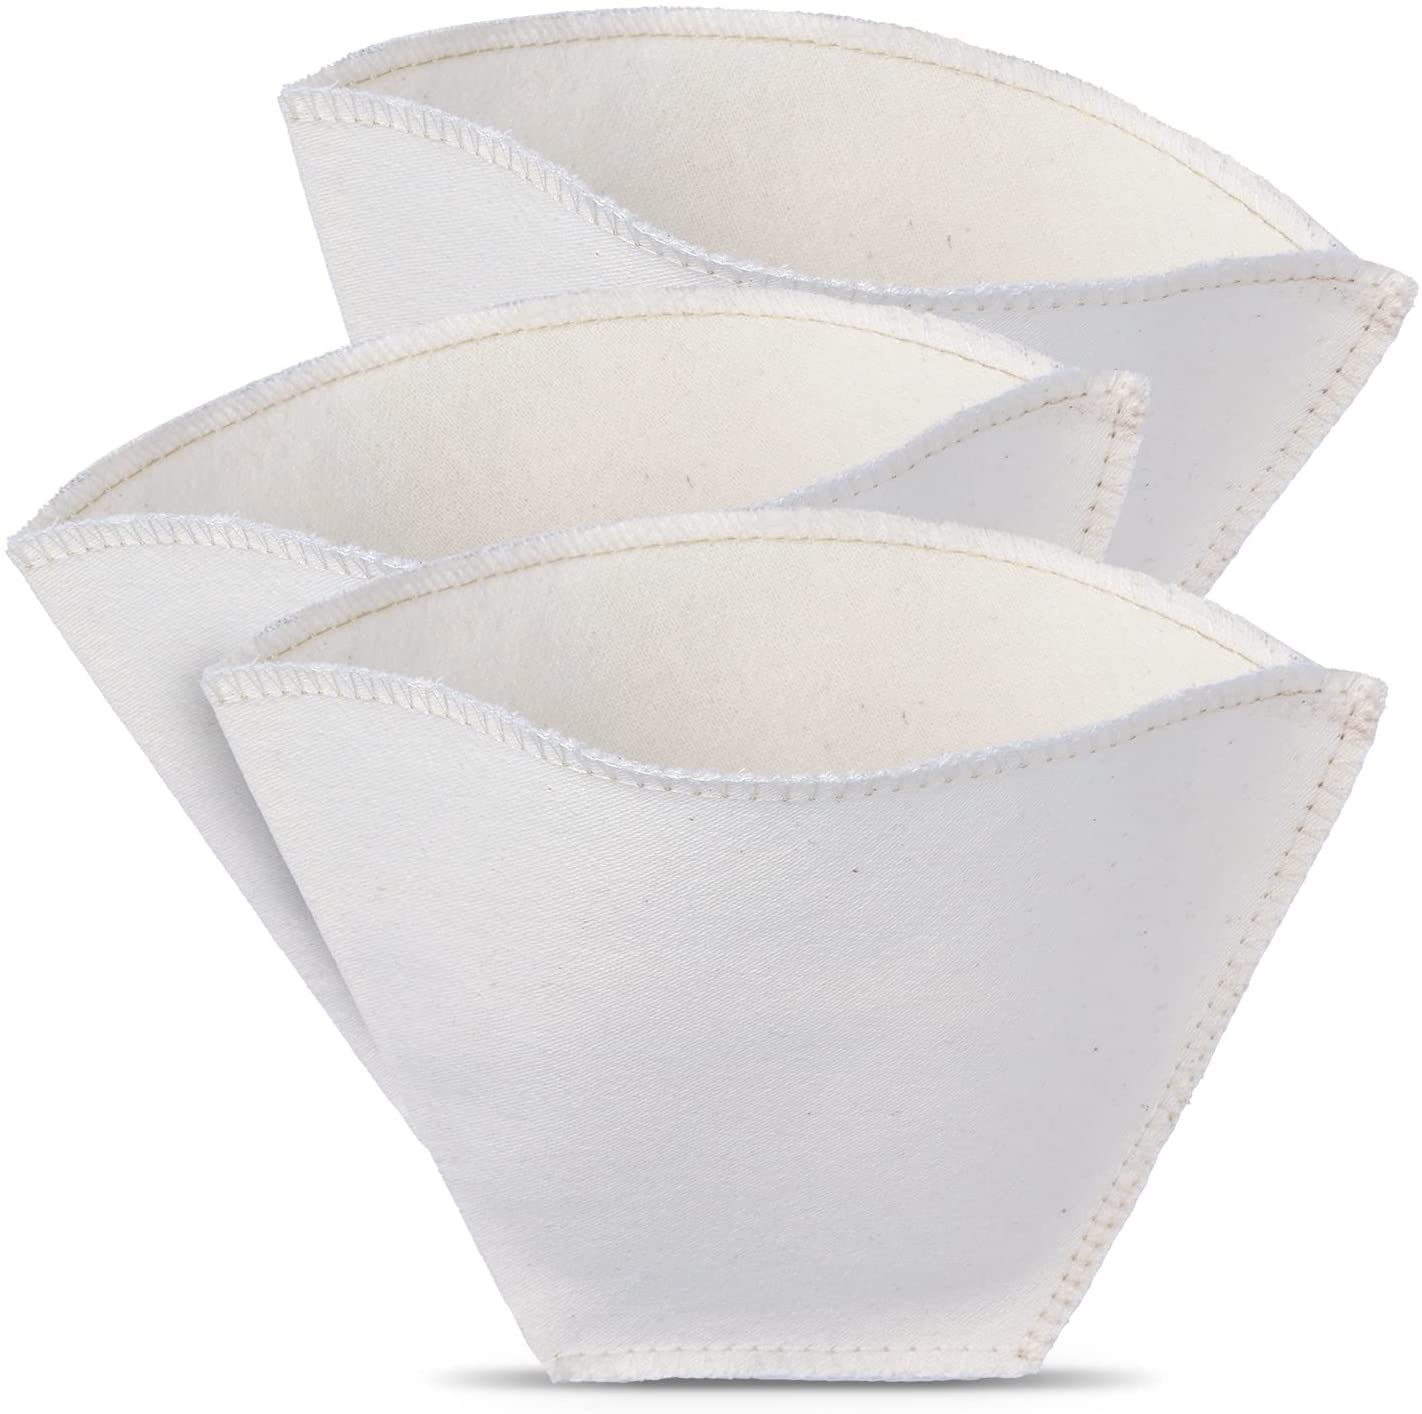 WUNDERBUY Handmade, reusable, economical cotton coffee filter for filter coffee machi